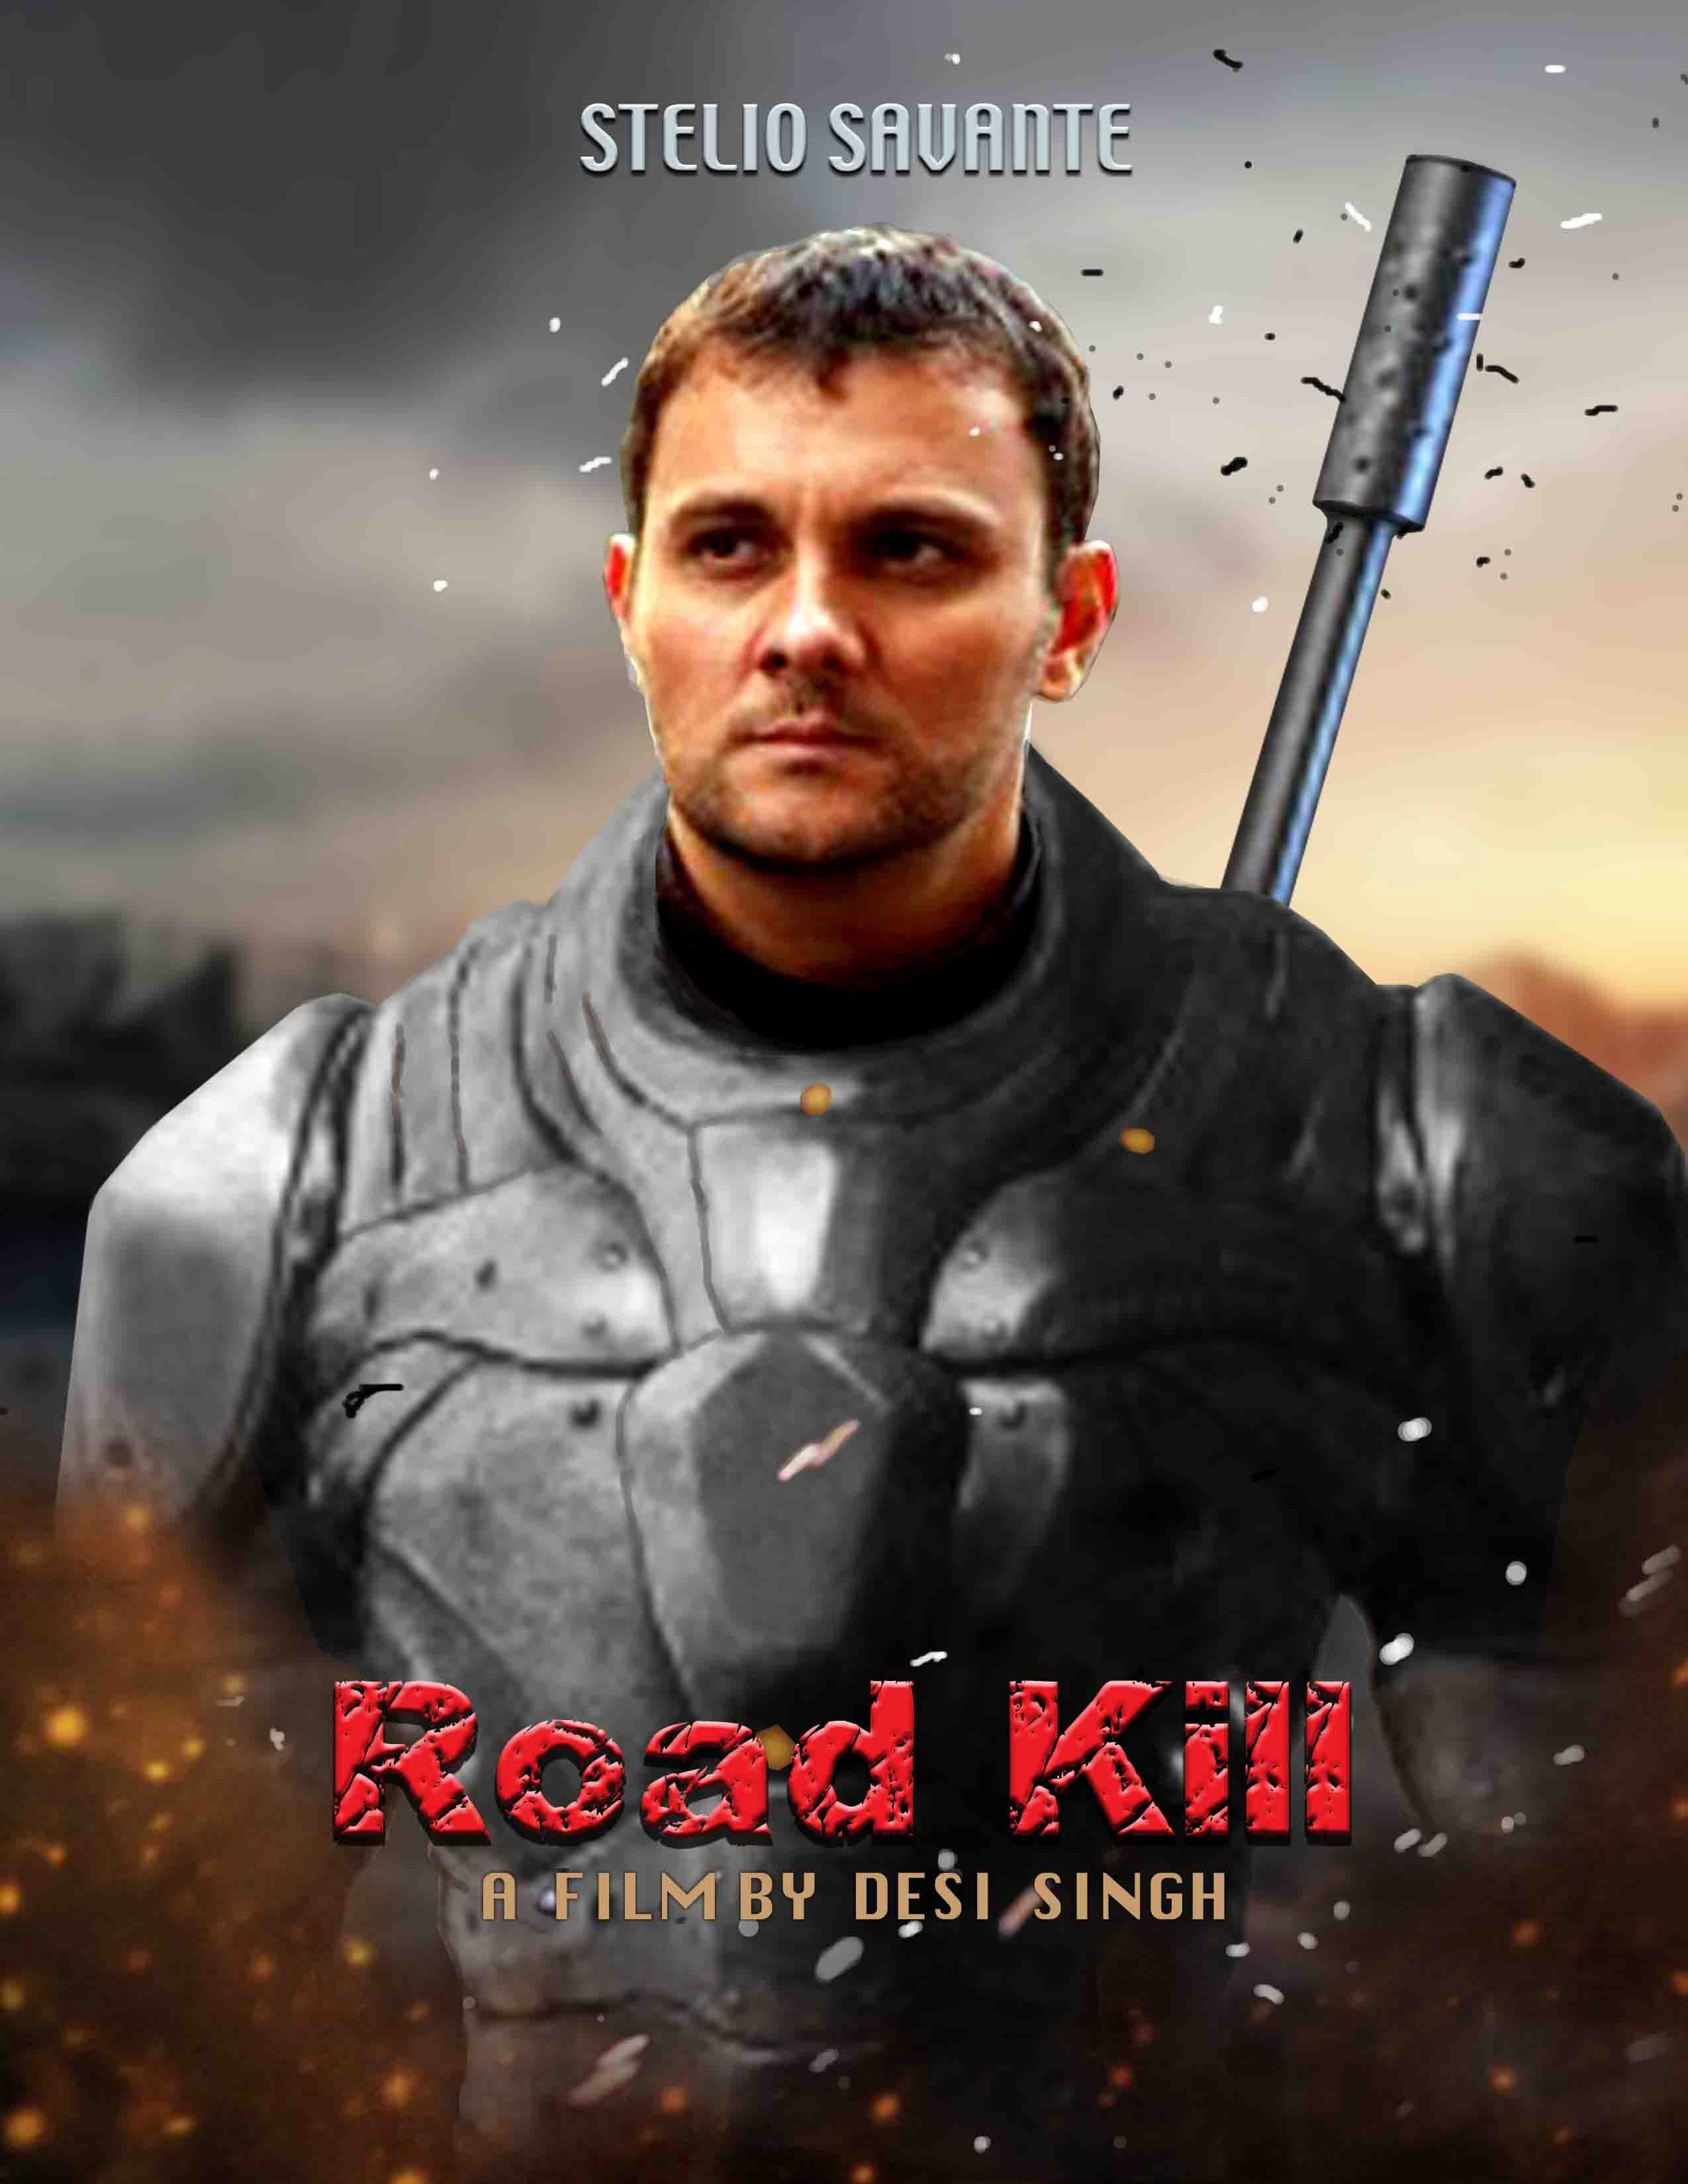 Concept Poster for 'Road Kill'